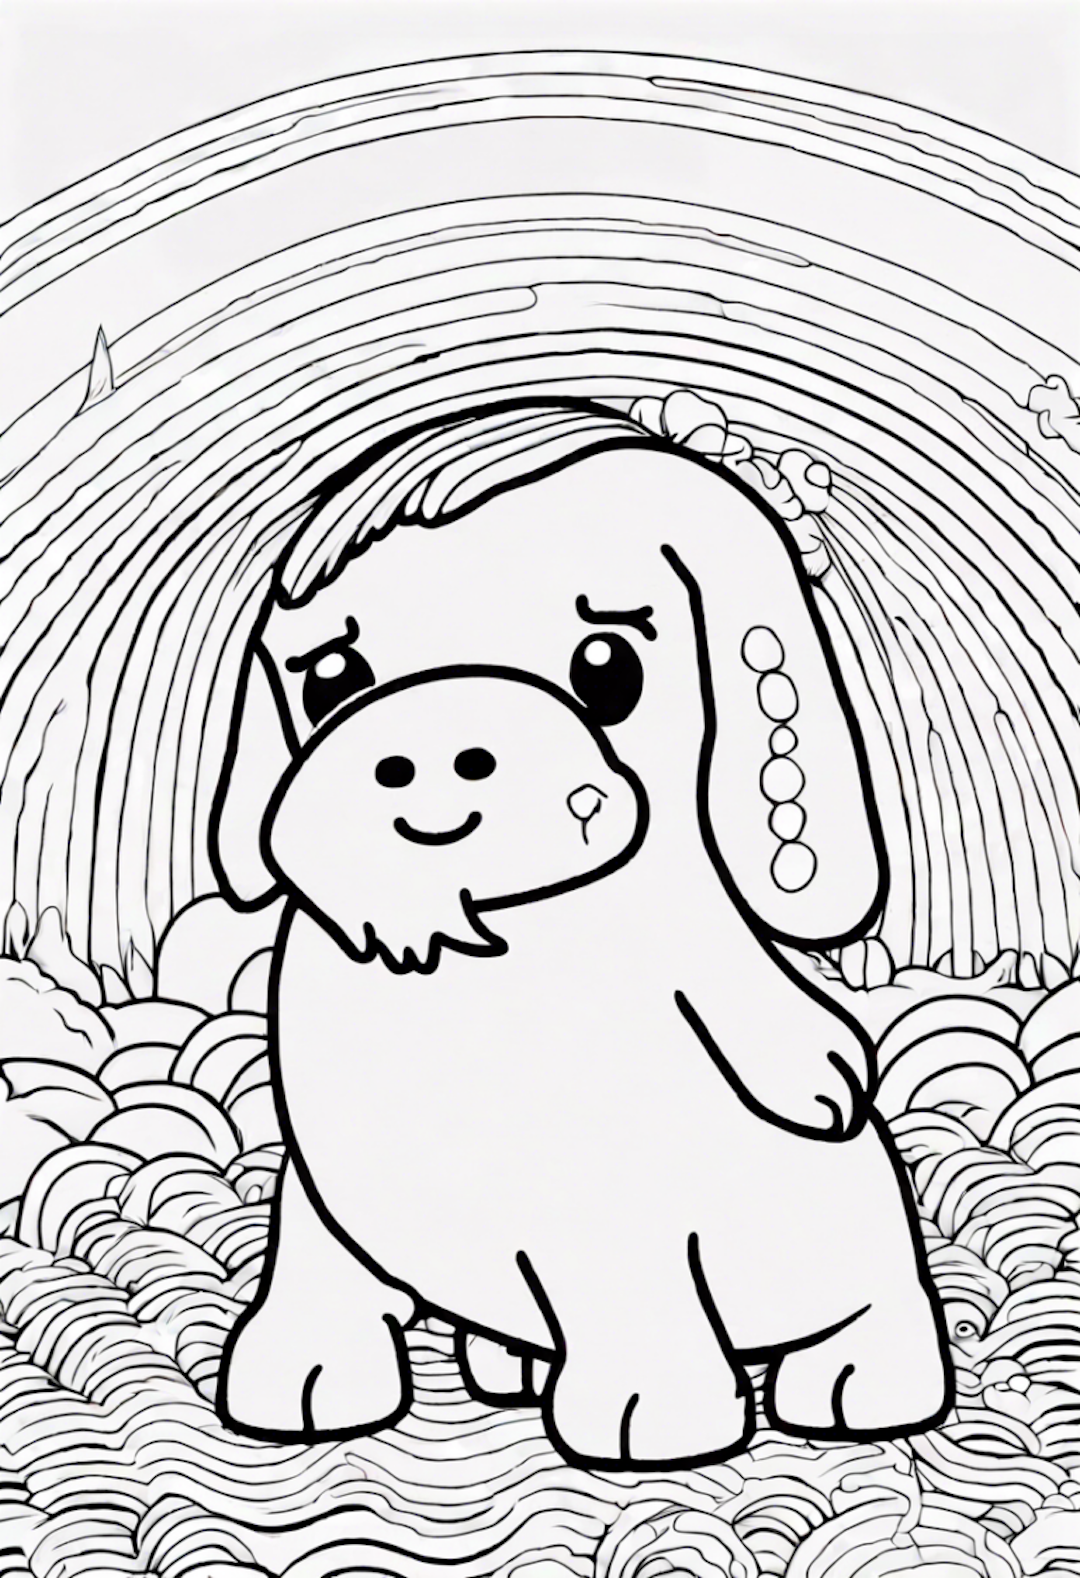 Buddy the Dog Meets the Rainbow coloring pages